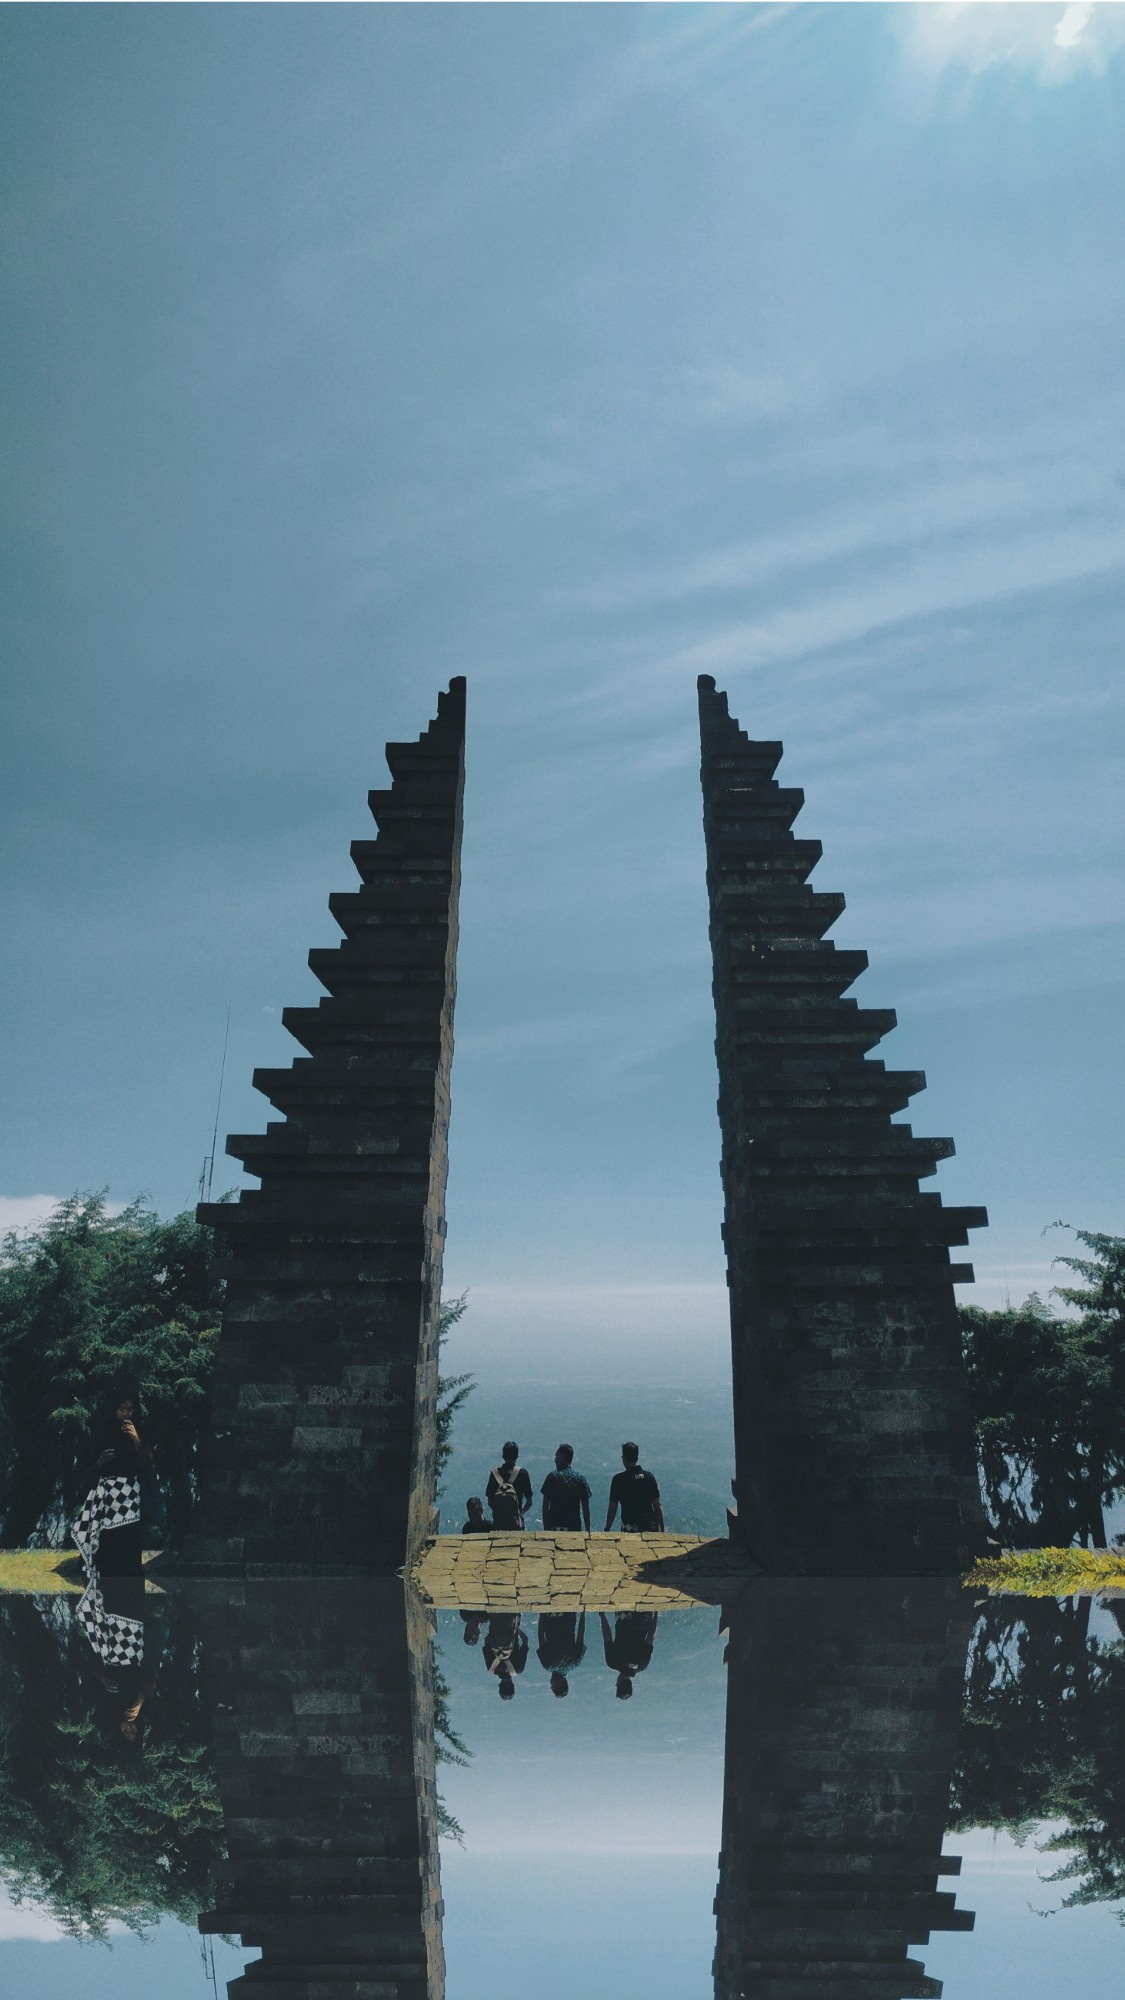 HD wallpaper, Genuine Moments, Mobile Hd Indonesia Wallpaper Photo, 1130X2000 Hd Phone, Indonesia Travel, Vsco Inspired Photography, Mobile Memories